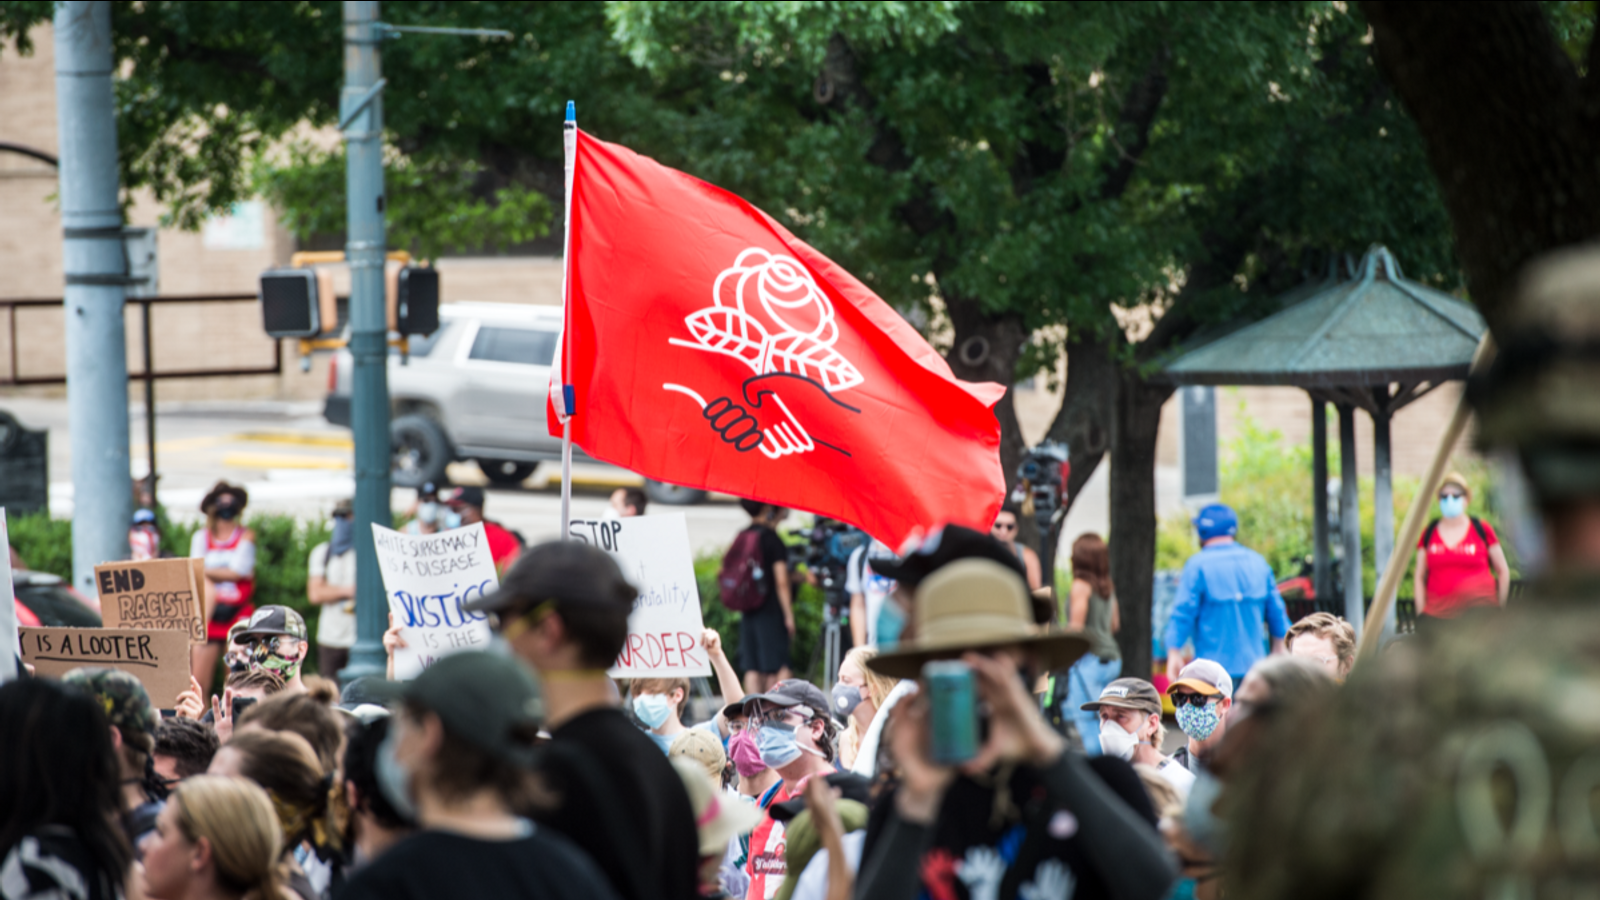 Democratic Socialists of America flag at an anti-police violence protest in Austin, Texas, May 2020.